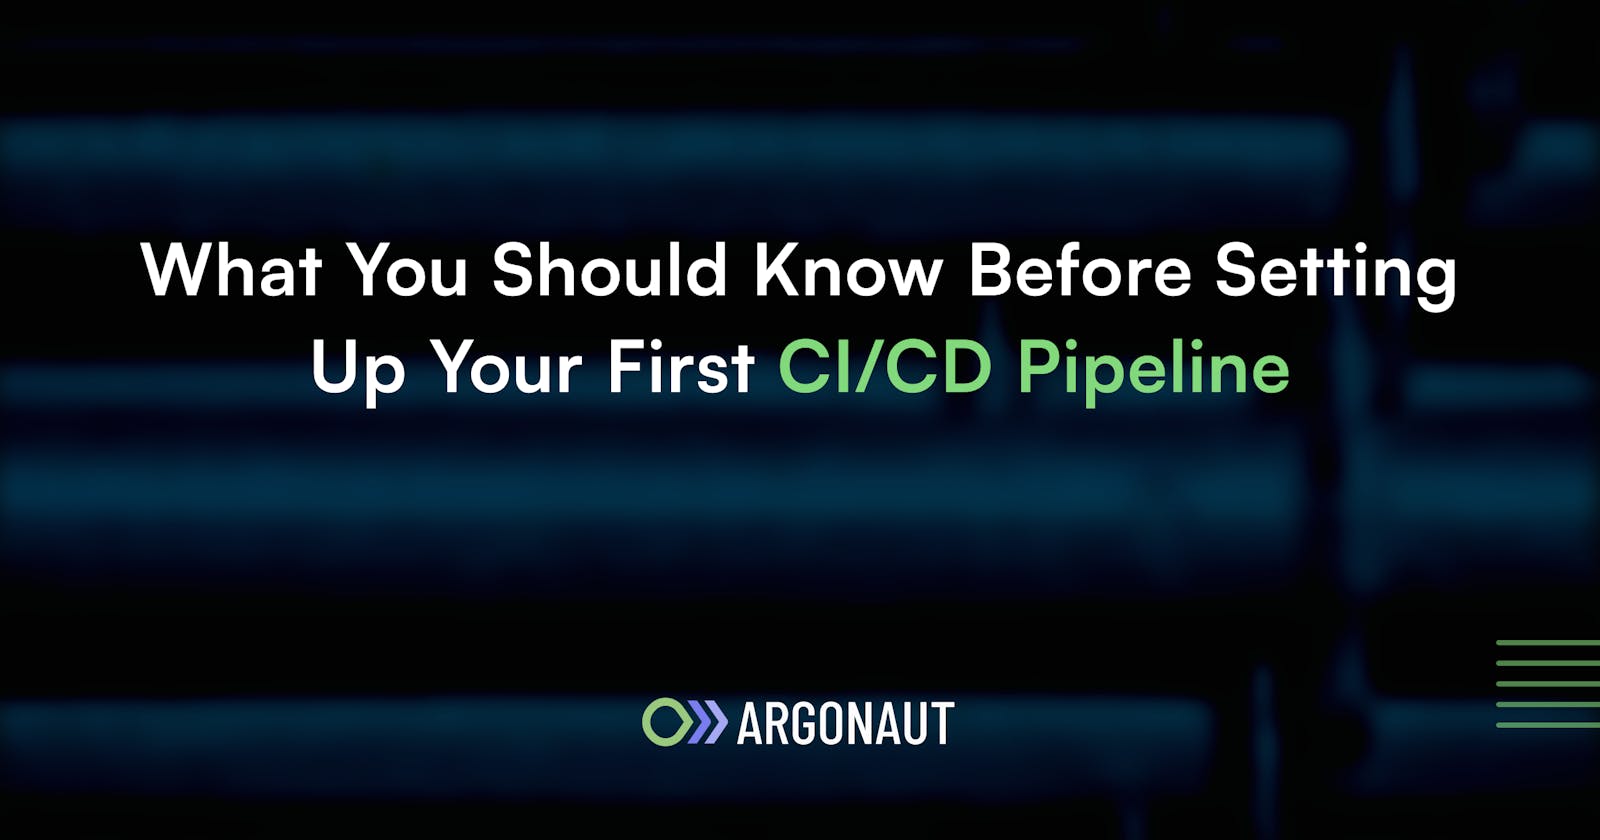 What You Should Know Before Setting Up Your First CI/CD Pipeline